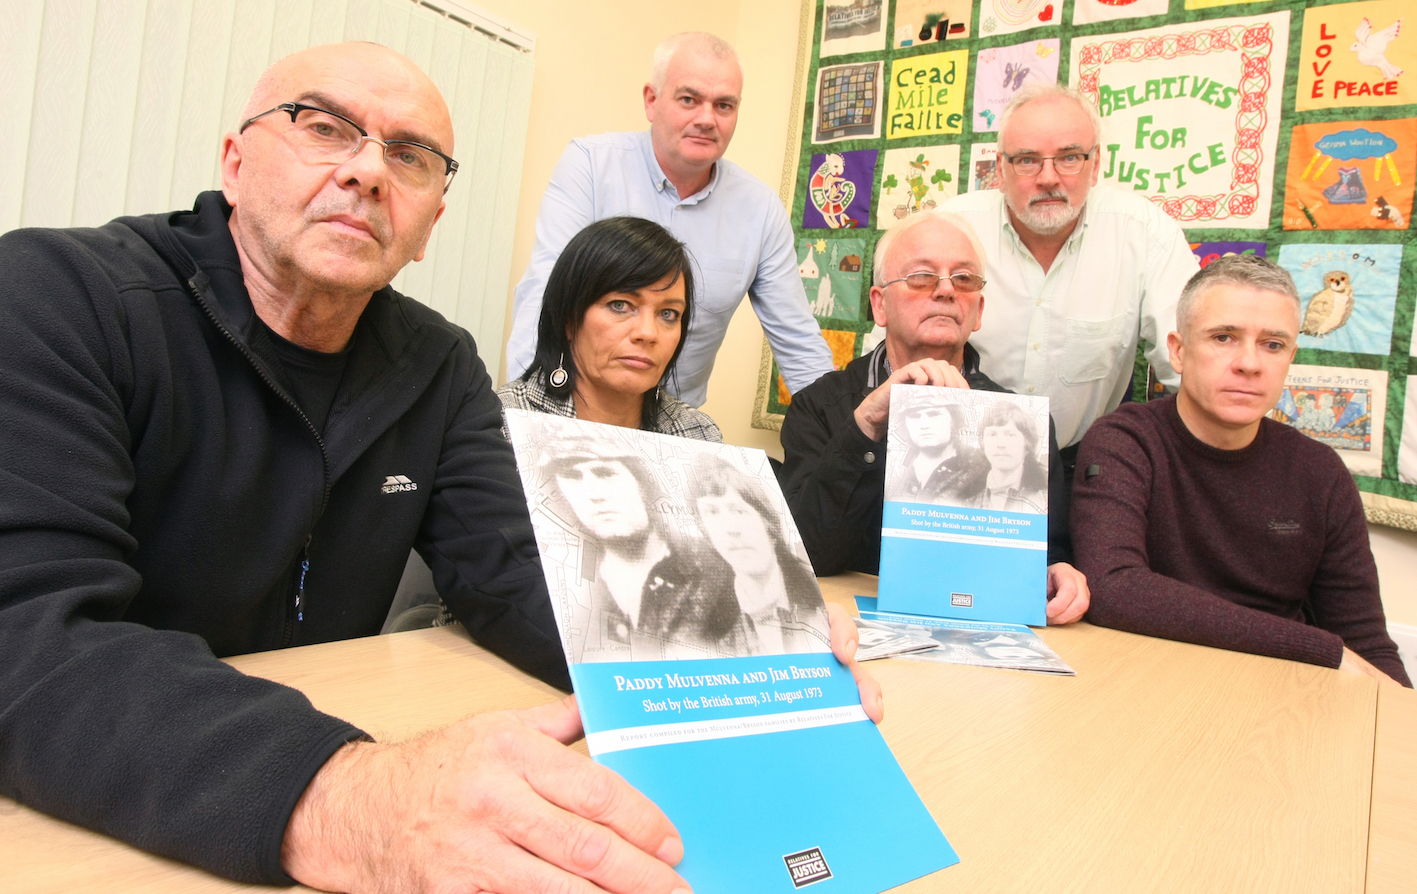 A report by Relatives for Justice into the shooting of Paddy Mulvenna and Jim Bryson.\n\nPictured with RFJ caseworker Paul Butler are Tina McComb, Bill McComb, Frank Duffy, Pat Conway (RFJ caseworker) and Patrick Mulvenna.